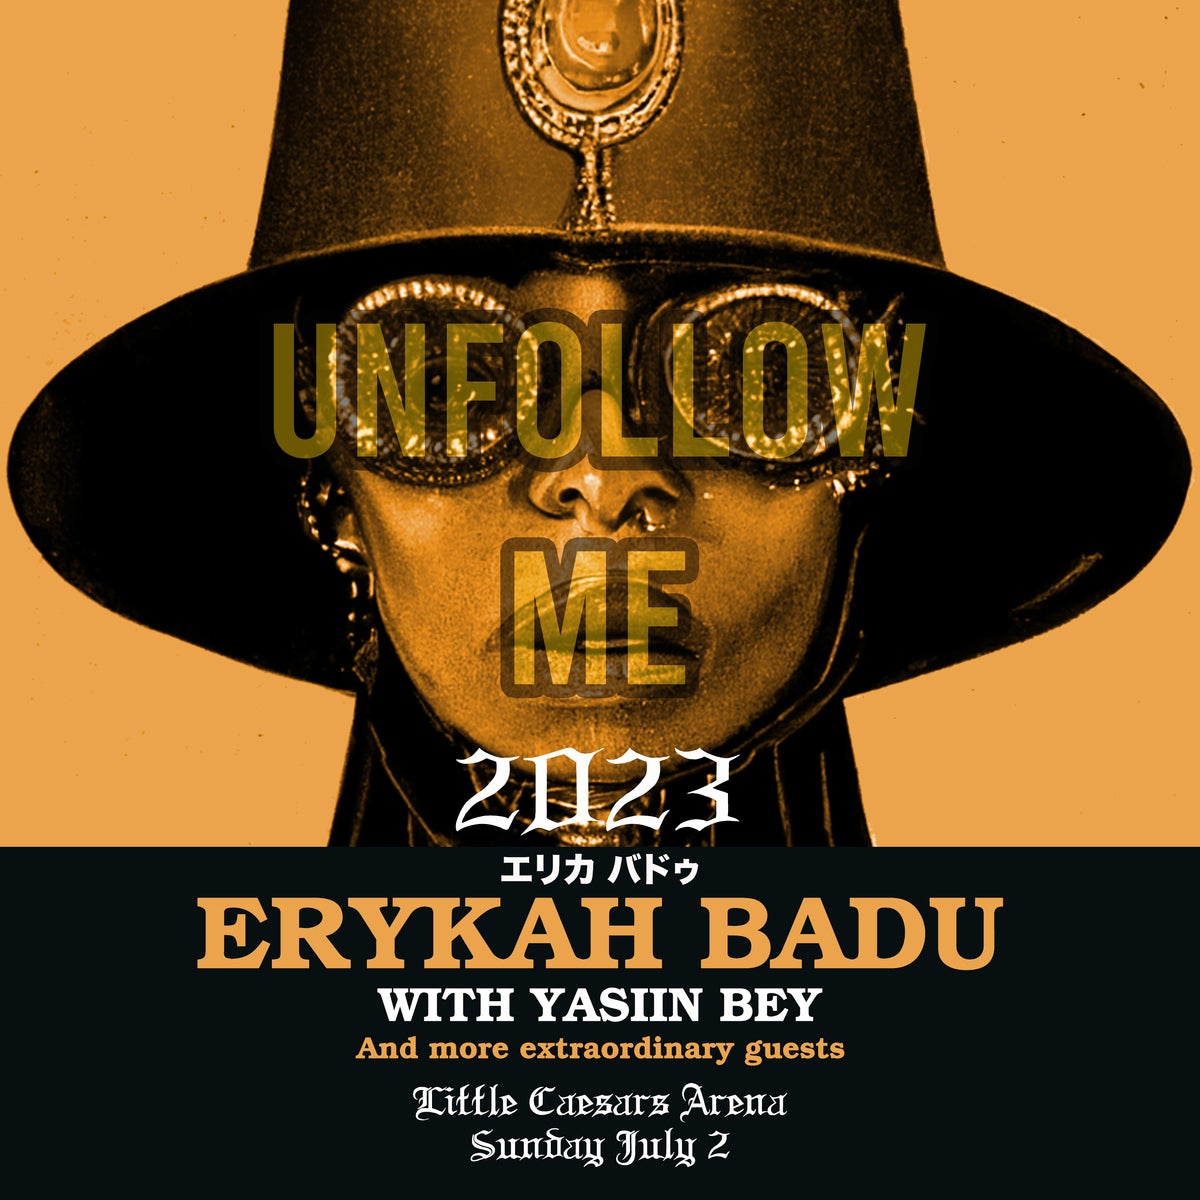 More Info for Music And Cultural Icon Erykah Badu Announces Little Caesars Arena Performance  As Part Of “Unfollow Me Tour”  With Hip-Hop Legend yasiin bey July 2